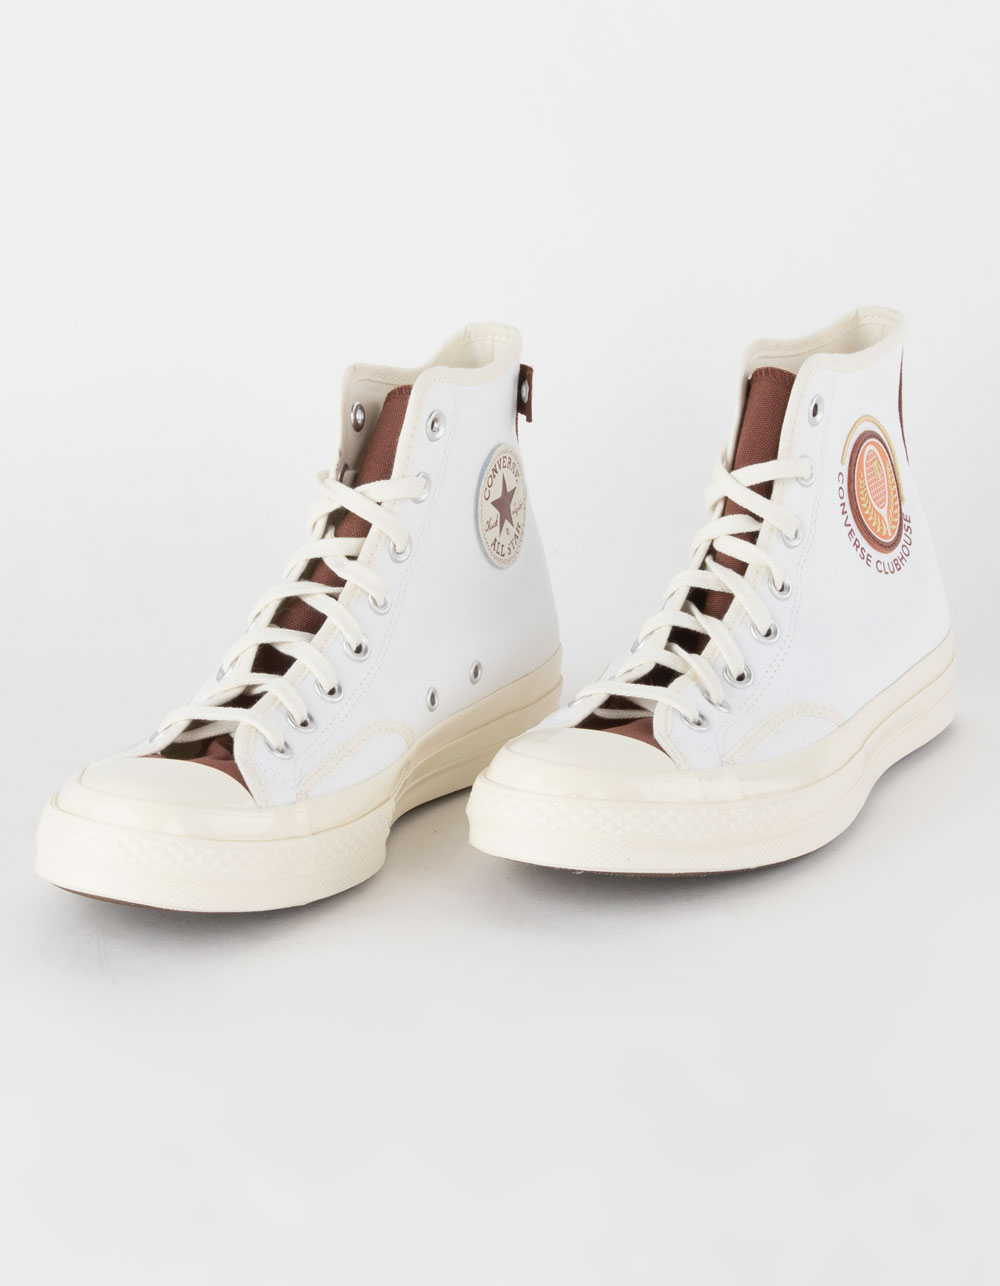 hacha Inevitable manzana CONVERSE Chuck Taylor All Star 70 Clubhouse High Top Shoes - WHT/RED |  Tillys